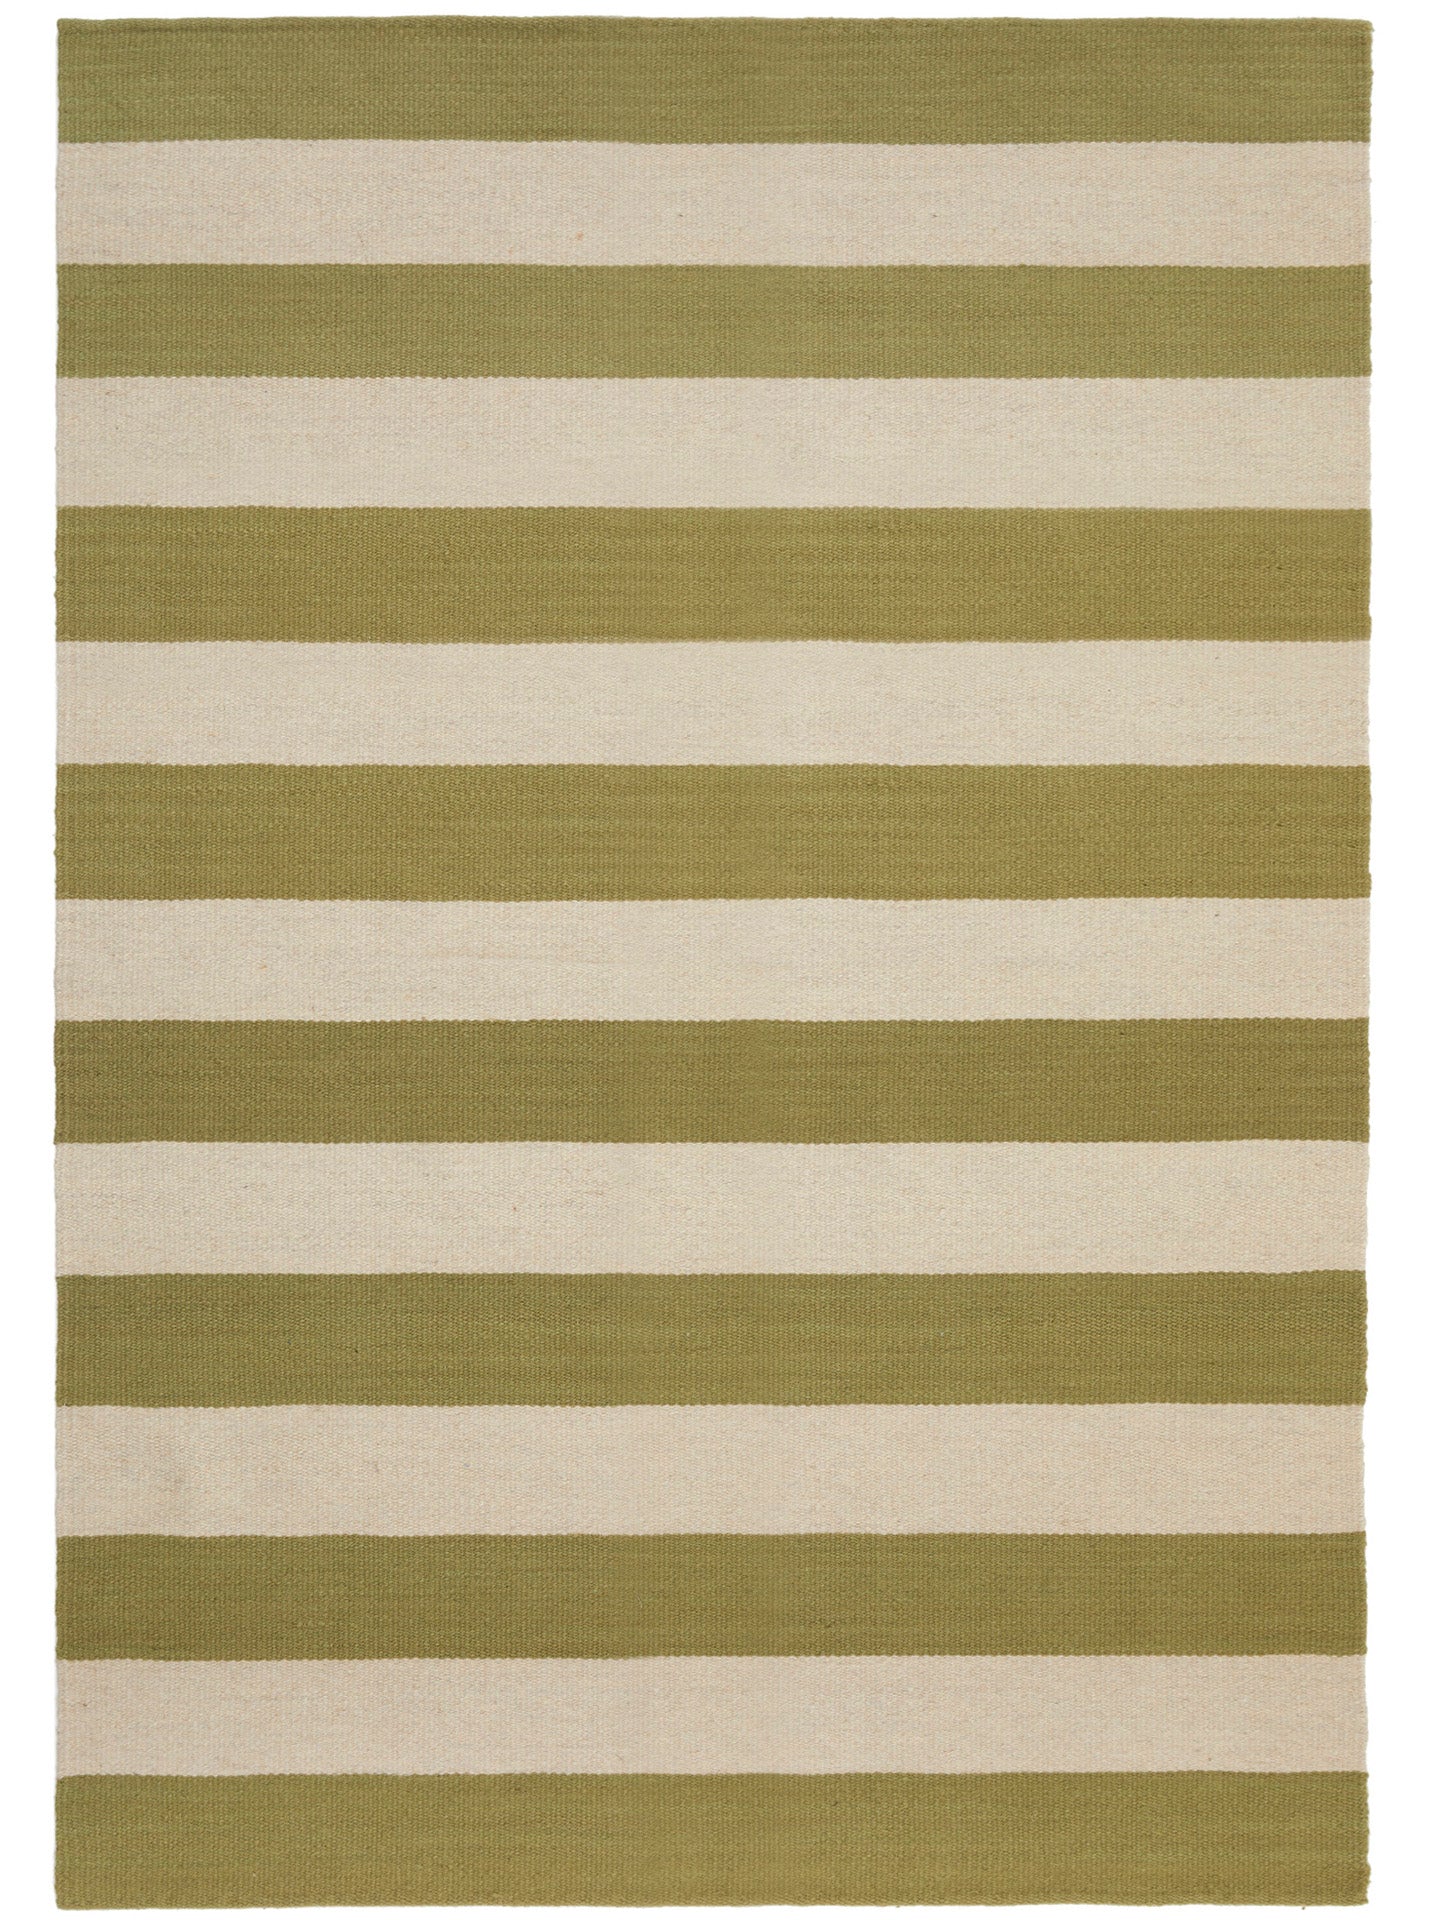 Striped Olive Green